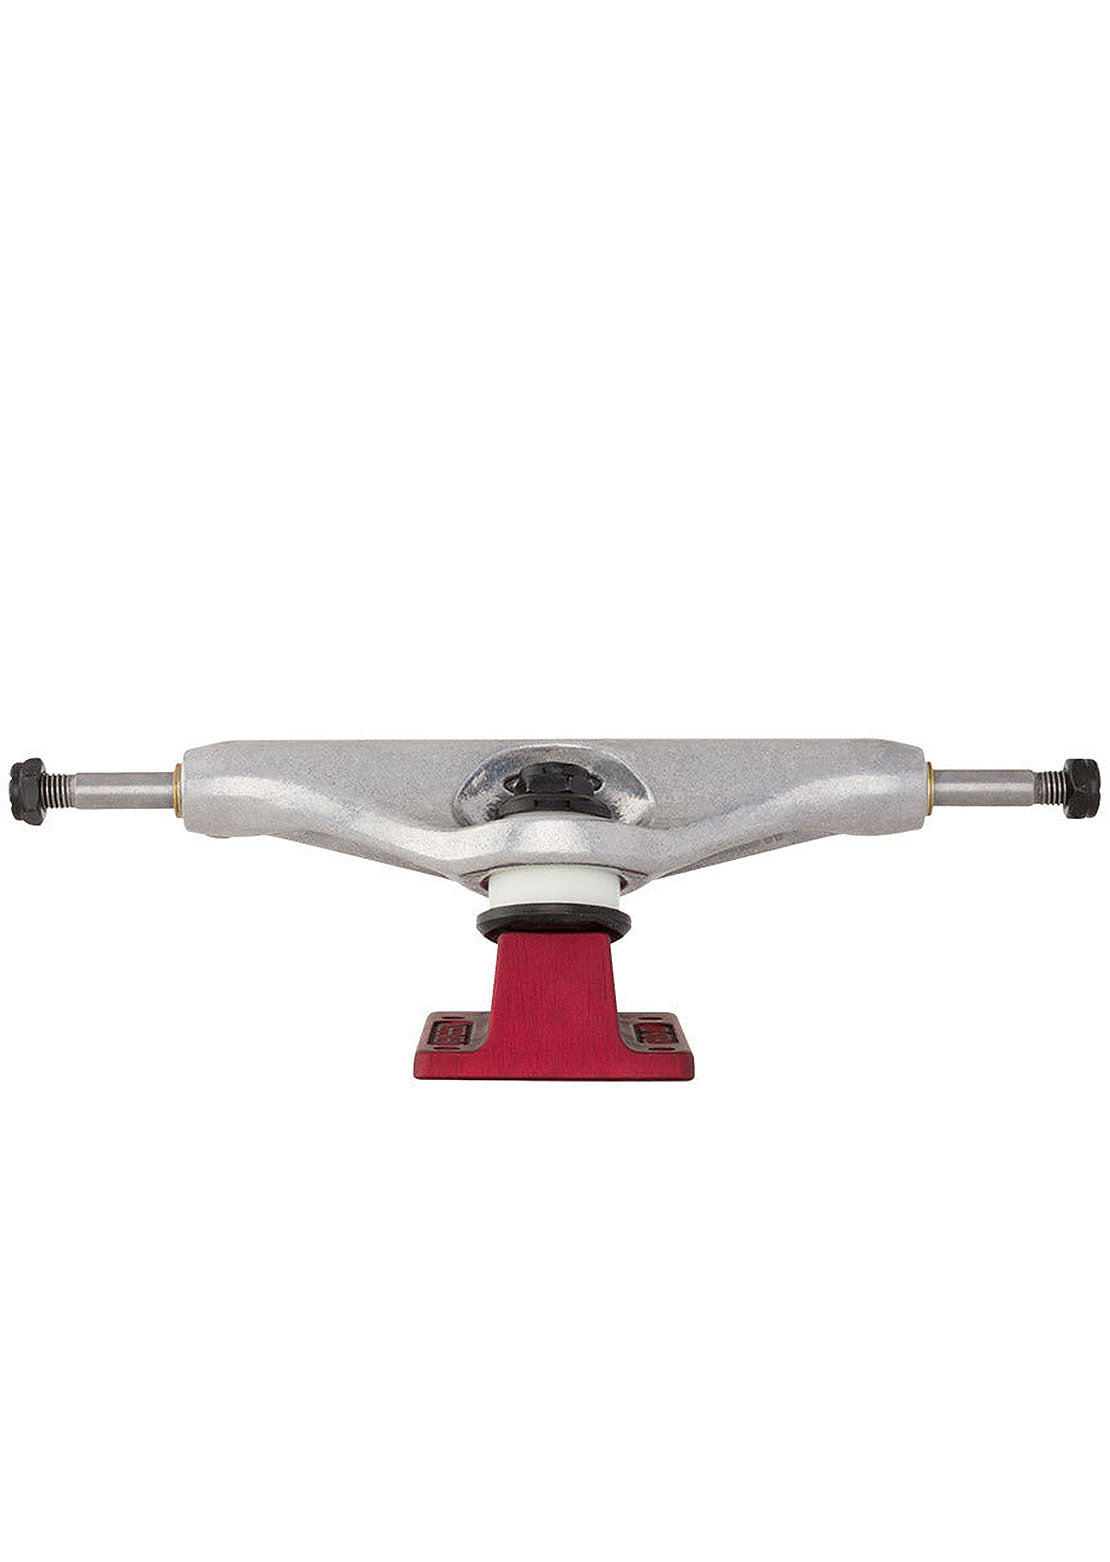 Independent Stage 11 Hollow Delfino Skateboard Trucks 2-Pack 159 mm Silver/Red